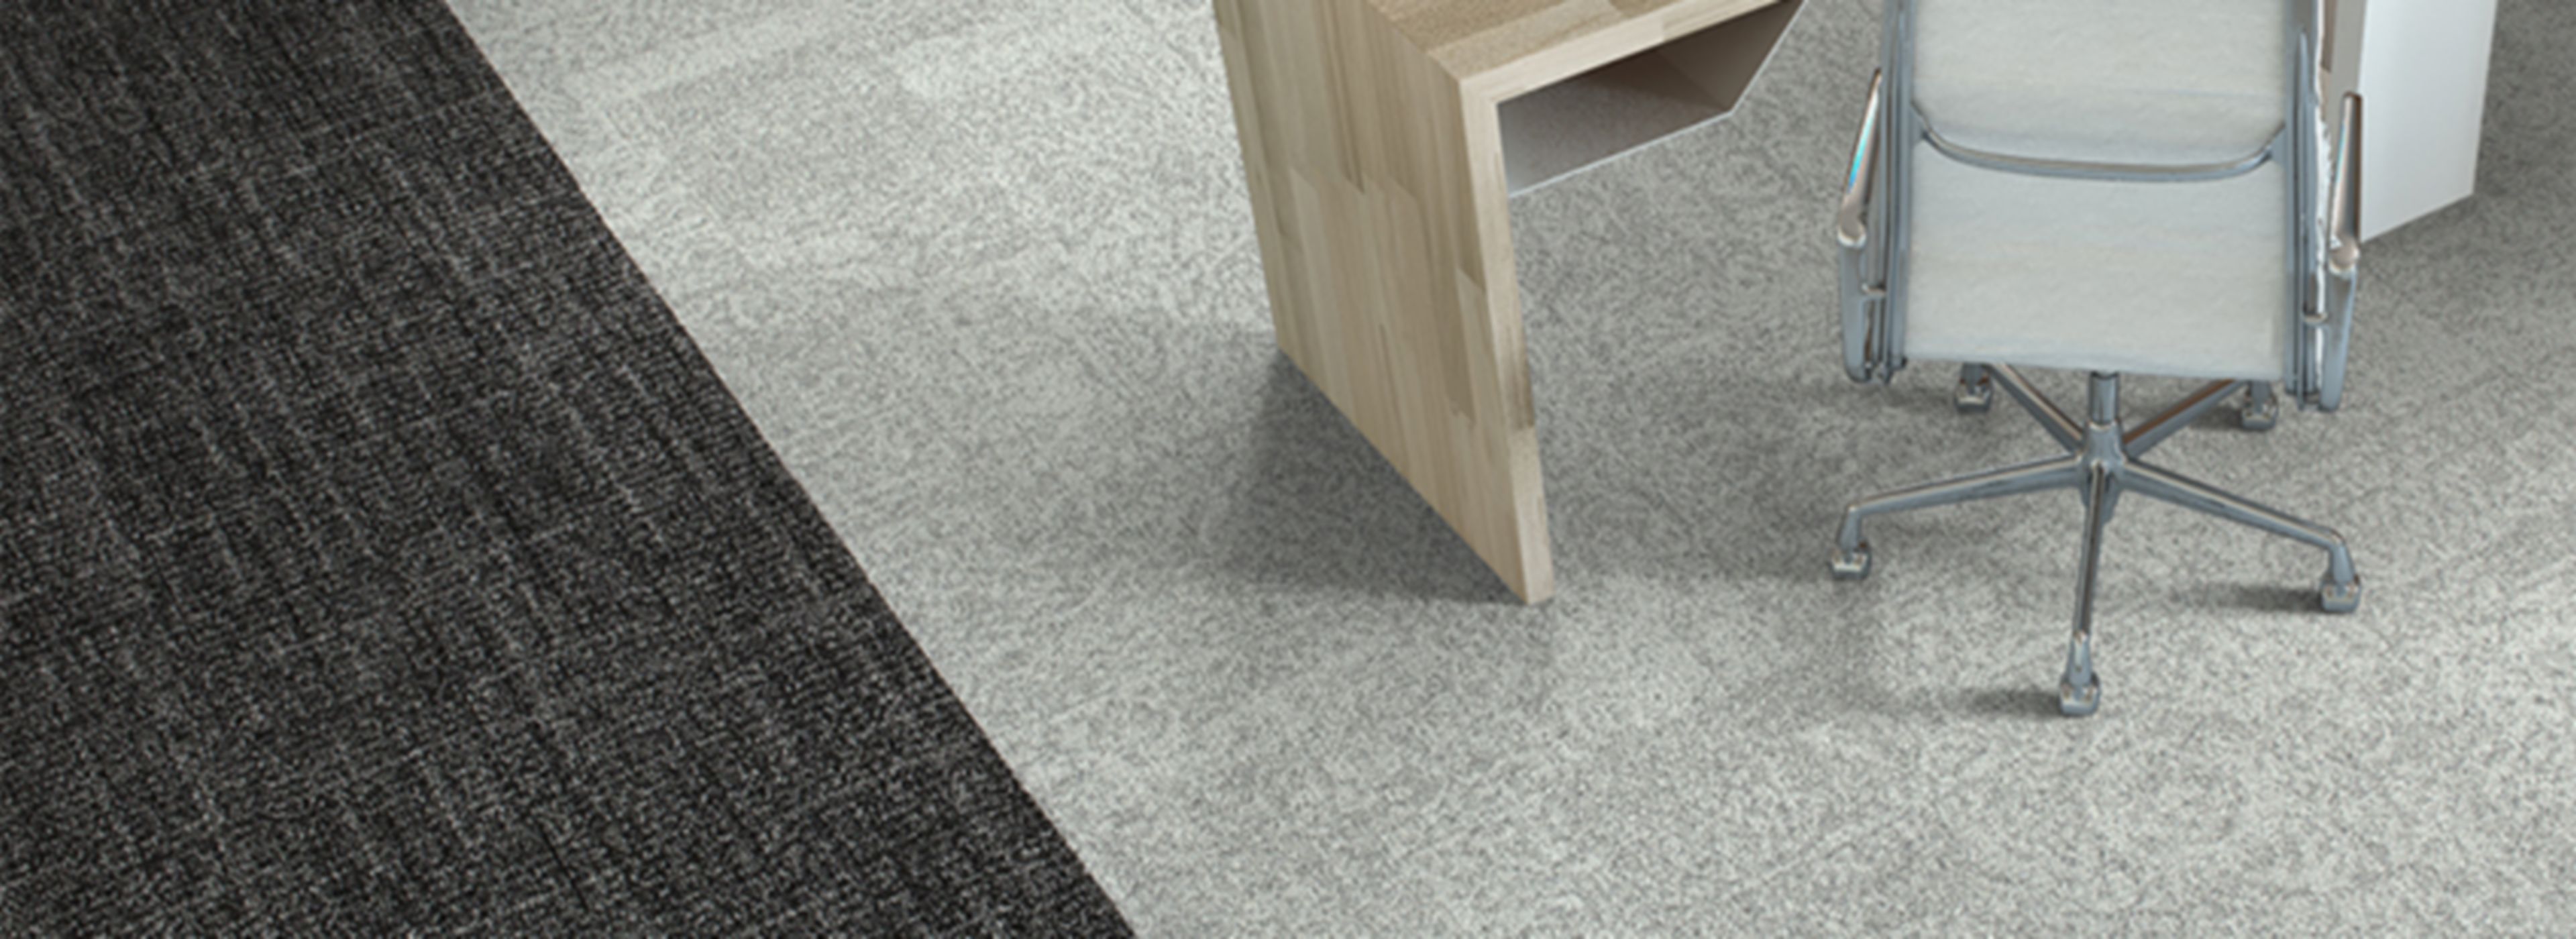 Interface Open Air 405 carpet tile in overhead view with small wooden workstation image number 1